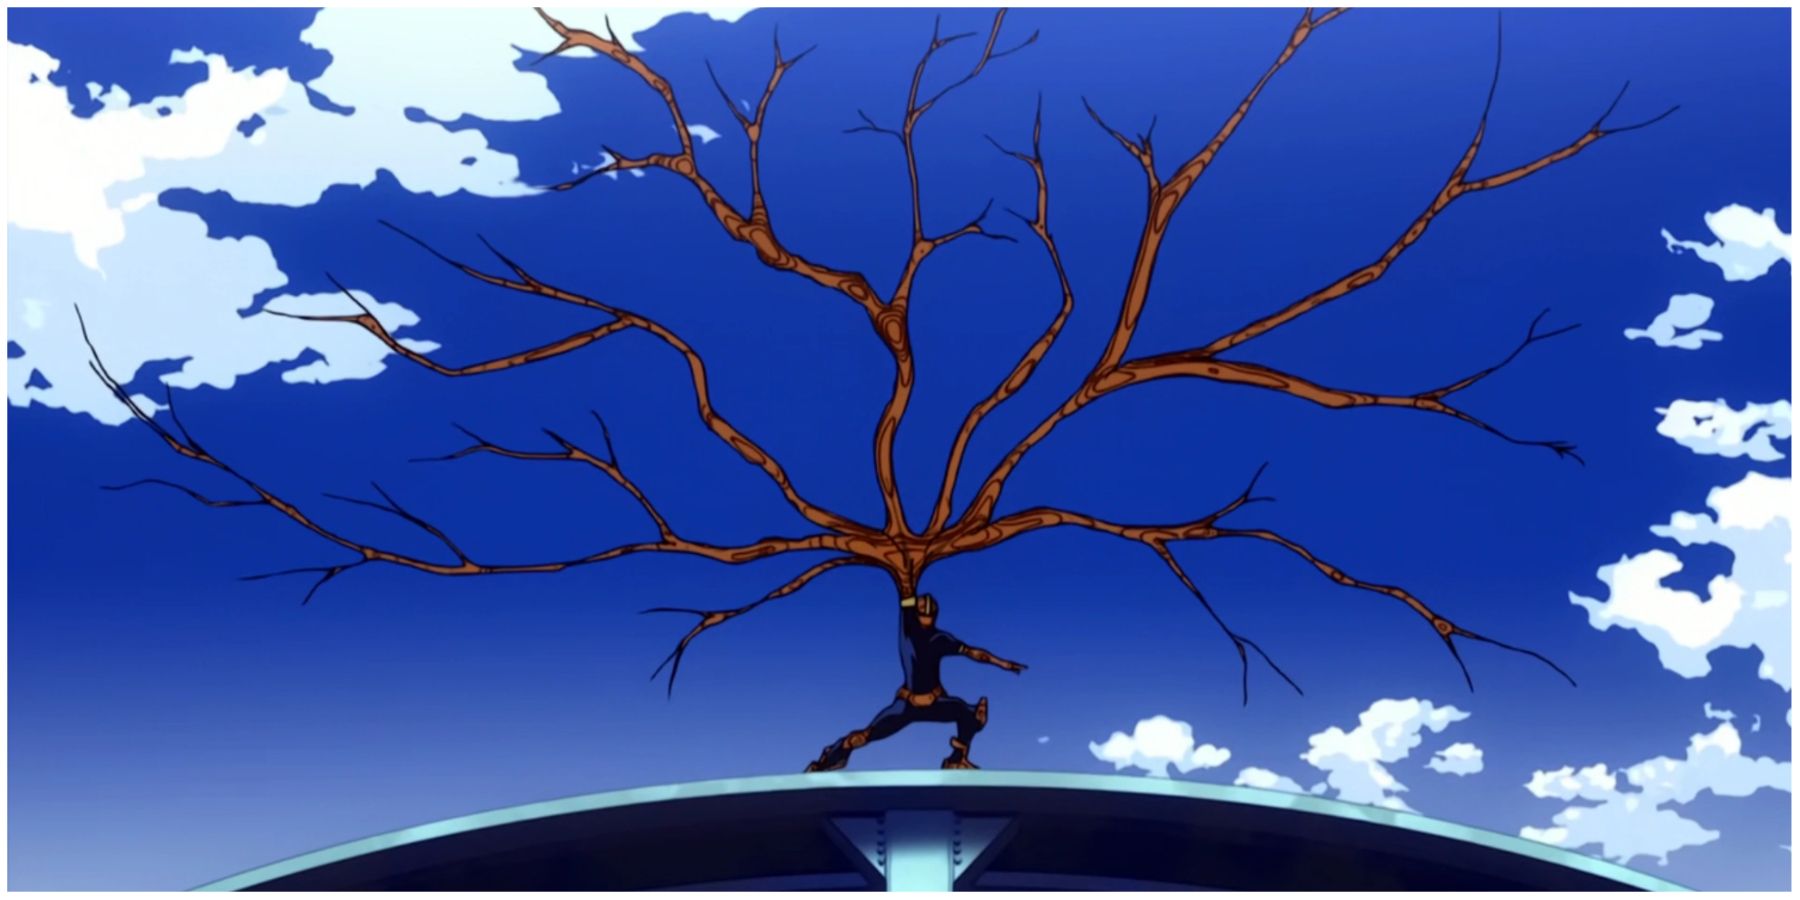 Kamui Using His Arbor Quirk To Create Numerous Branches in My Hero Academia